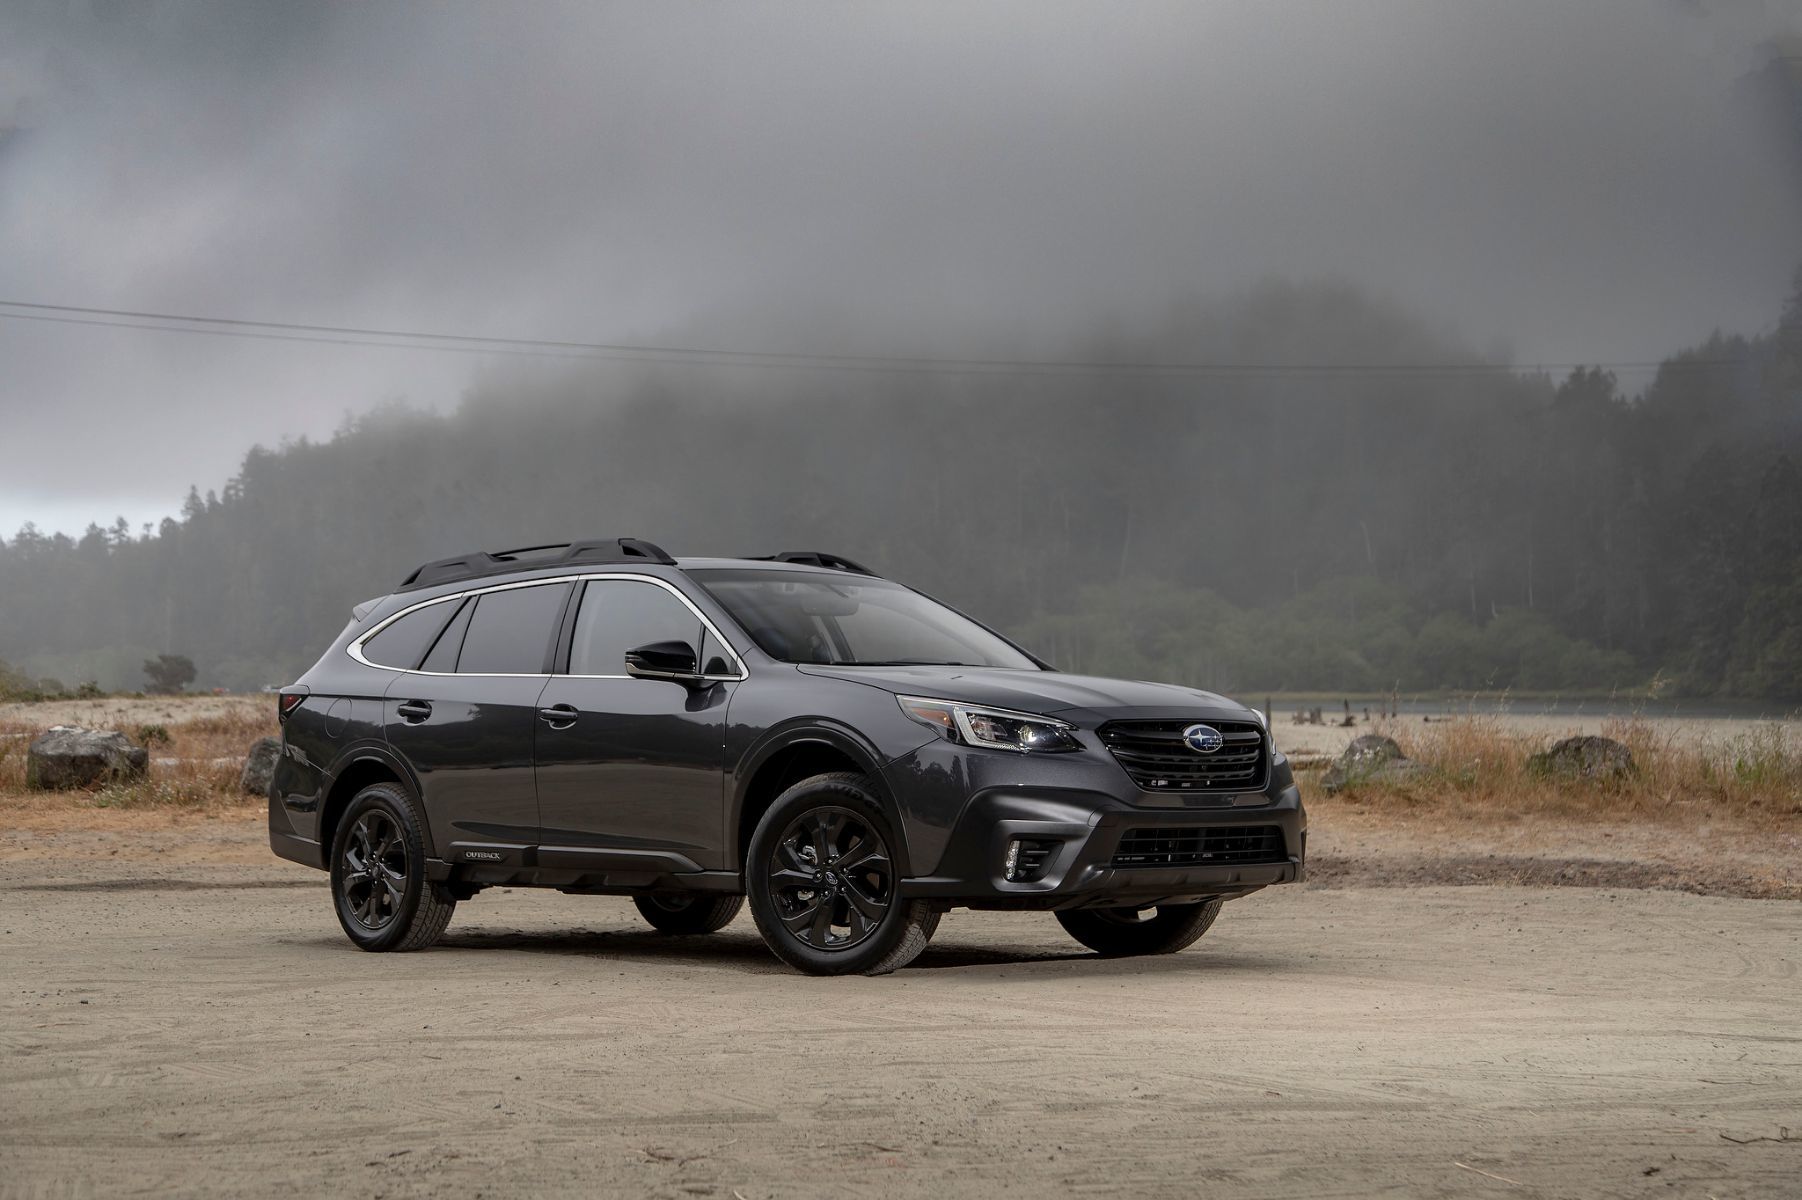 2021 Subaru Outback vs. 2021 Toyota RAV4: The Outback is Your Tool for Adventure